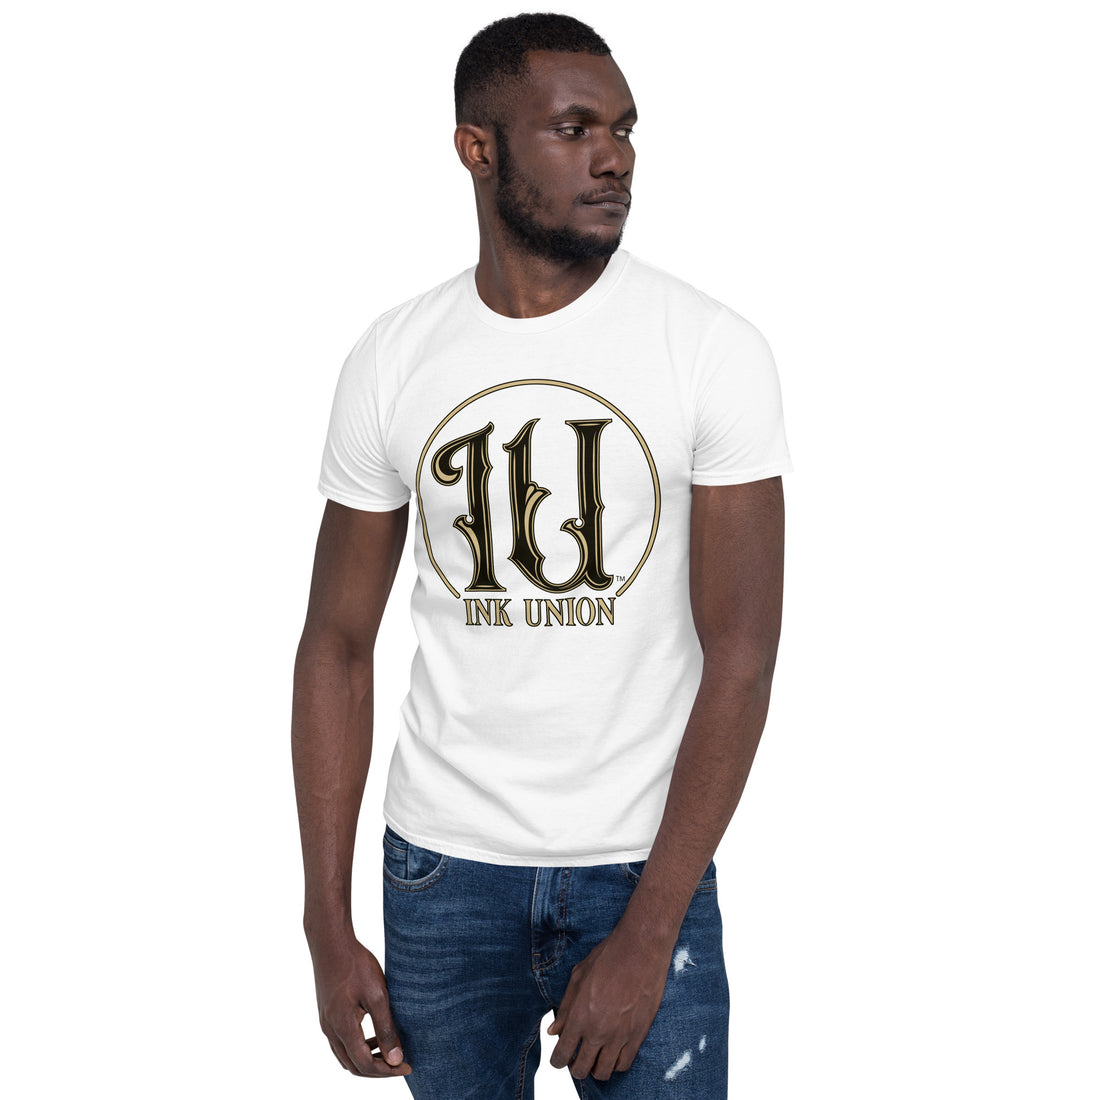 An attractive man wearing an Ink Union Clothing Co. white t-shirt featuring the Ink Union ring logo in black and gold.